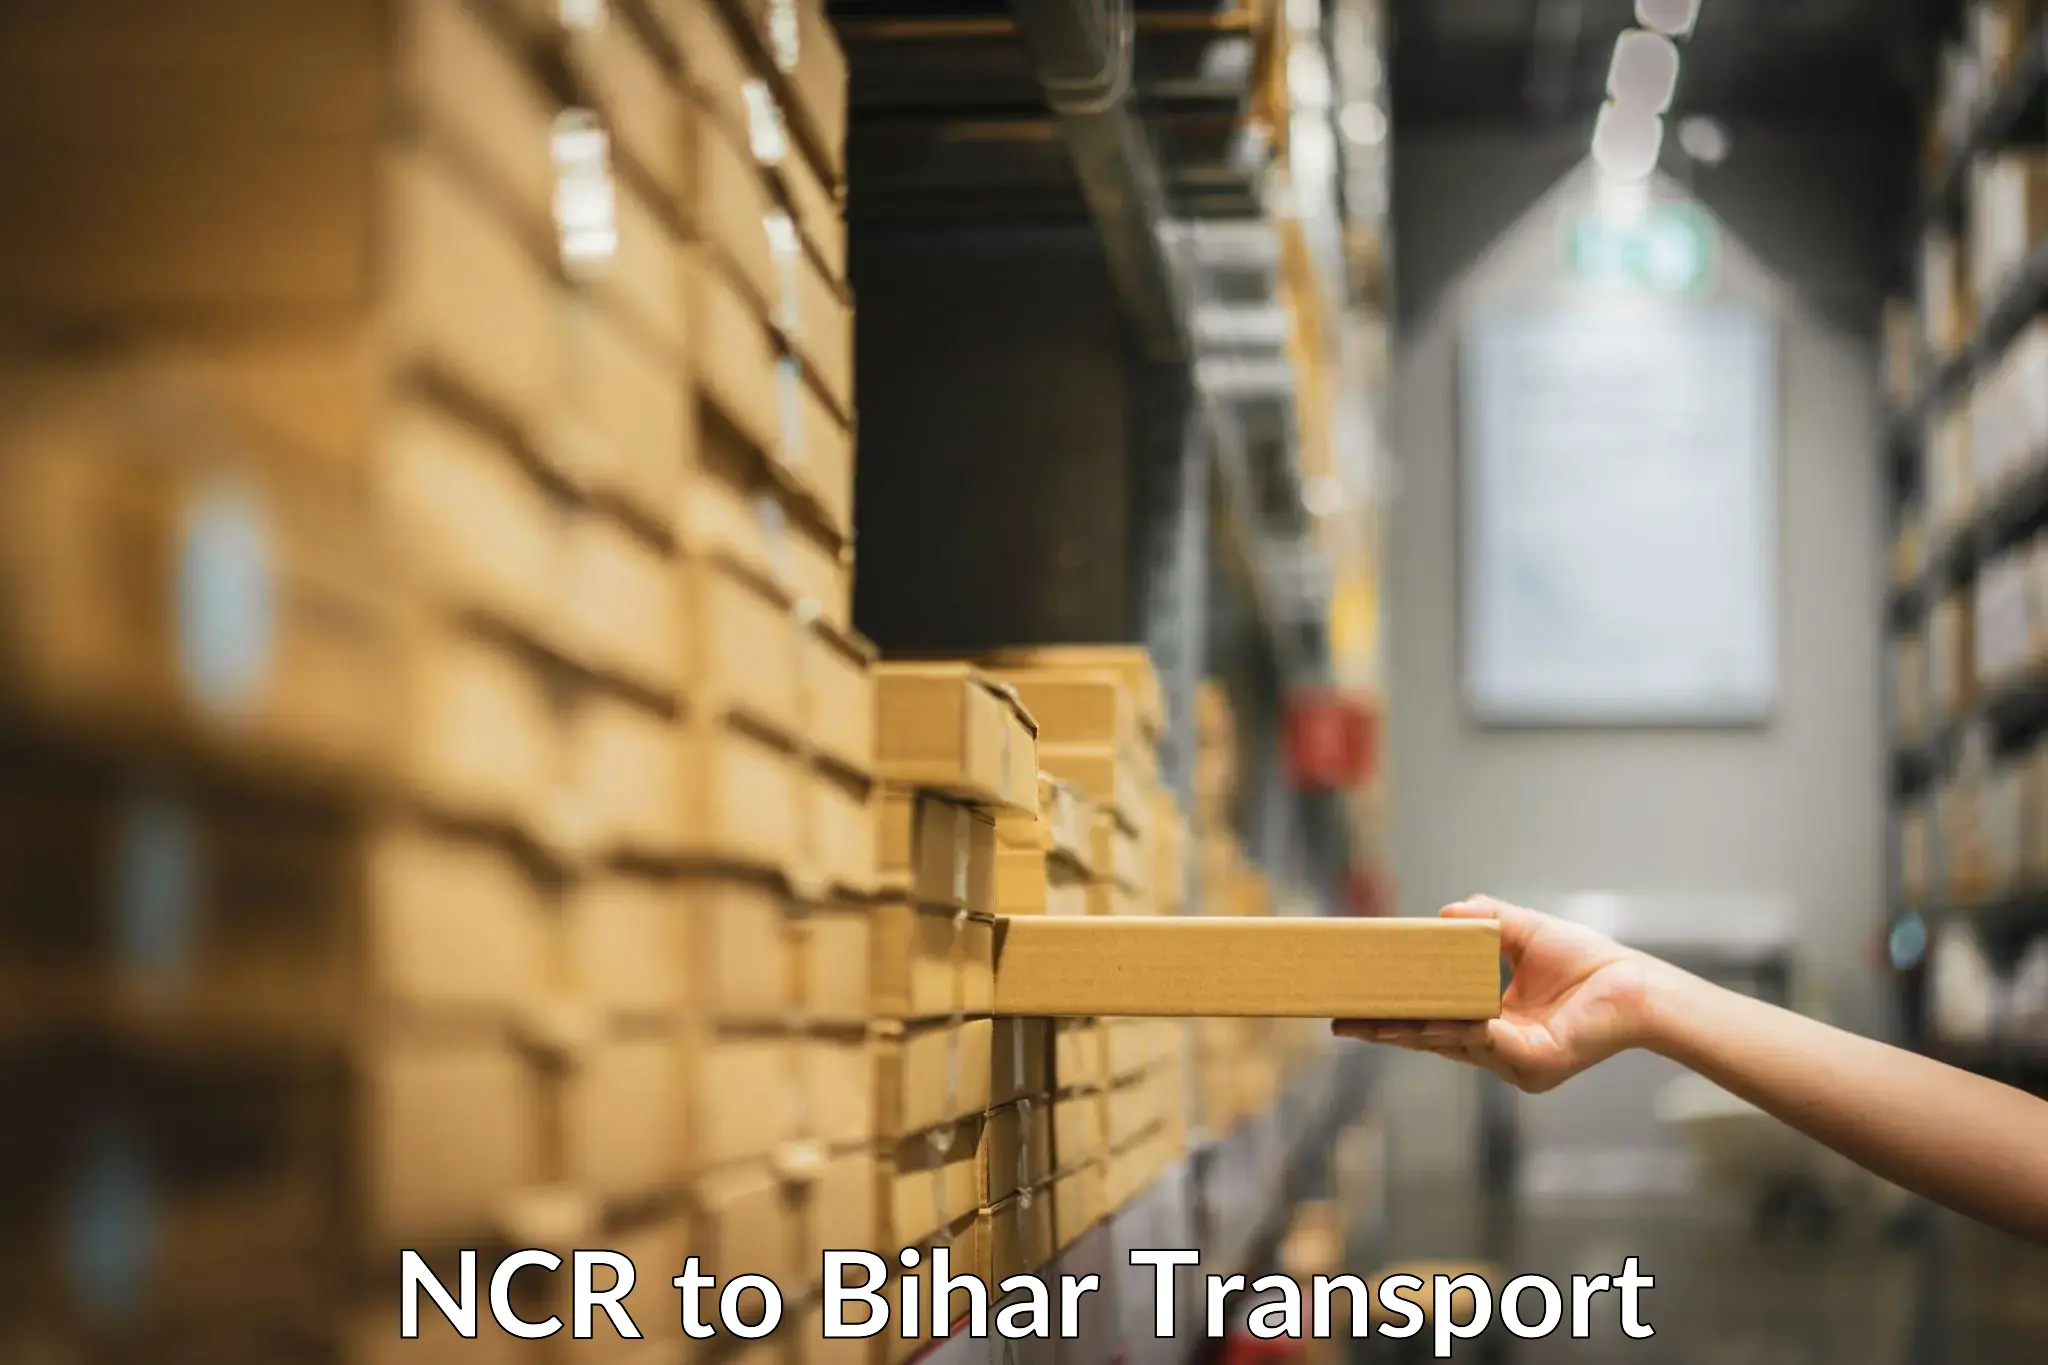 Container transport service NCR to Sheohar